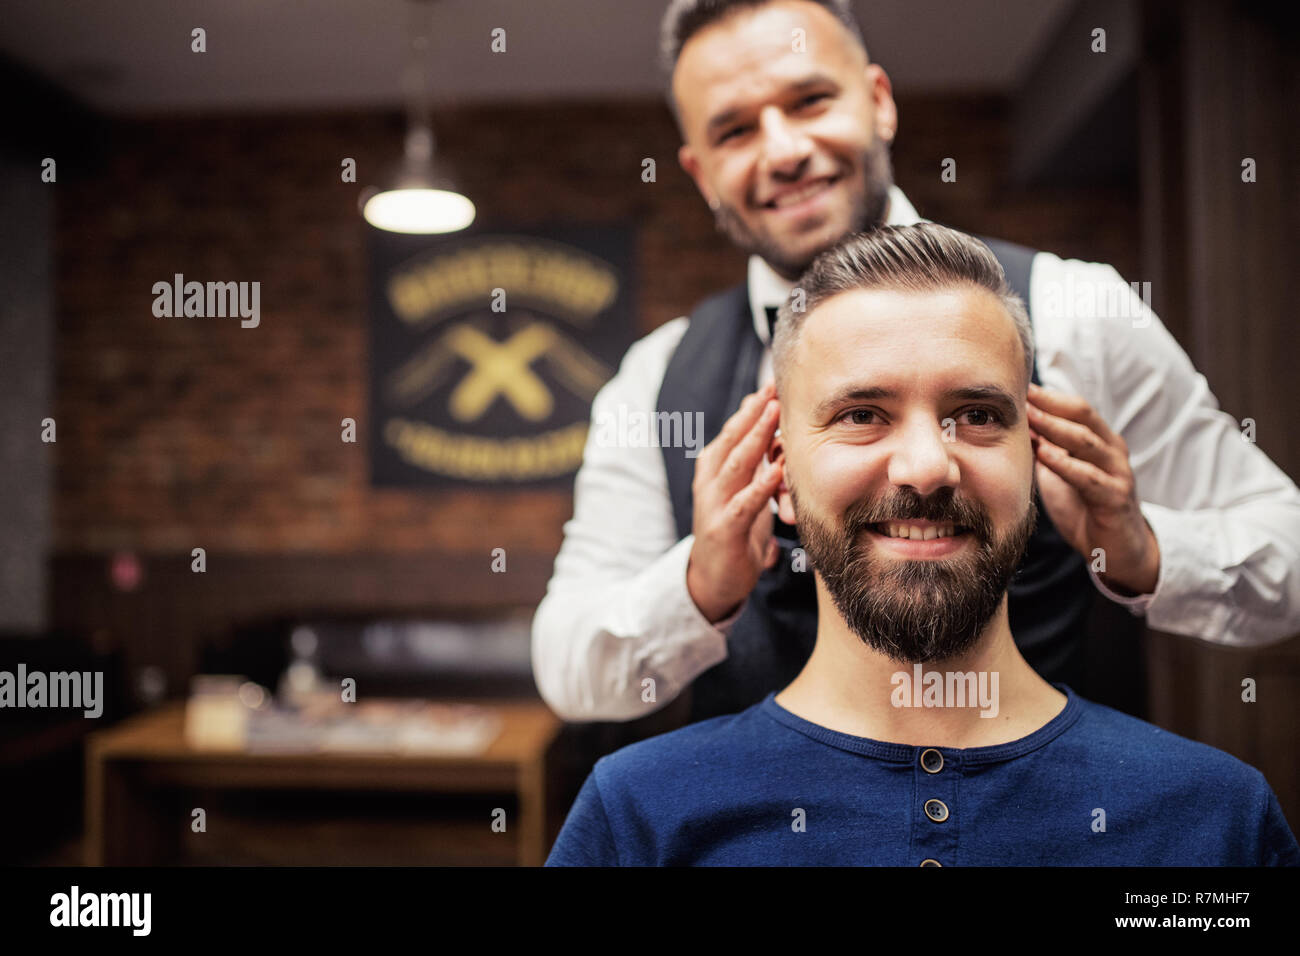 Hipster man client visiting haidresser and hairstylist in barber shop. Copy space. Stock Photo